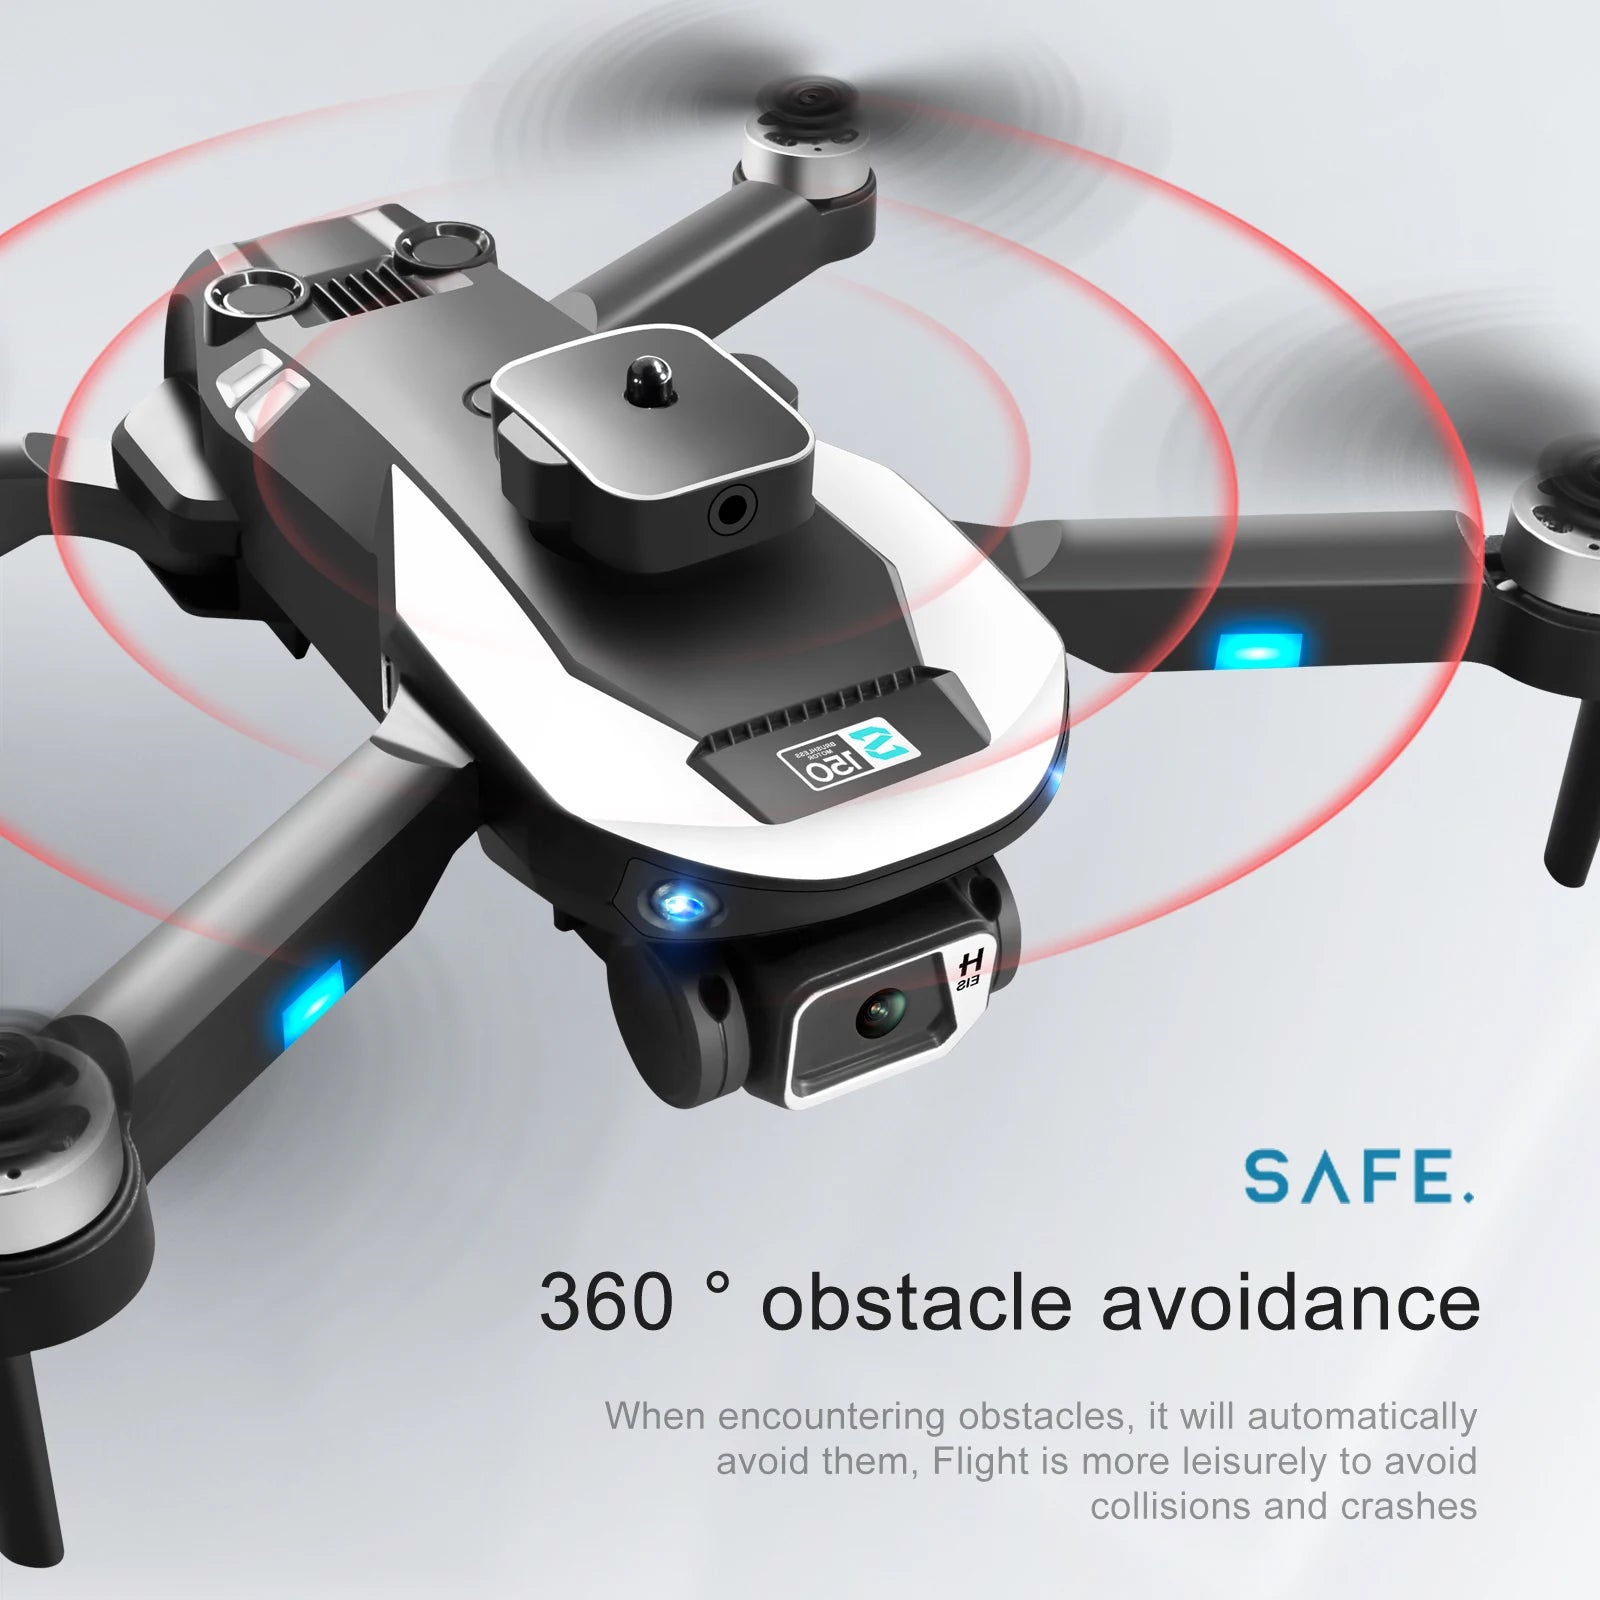 KBDFA D6 Mini 4K HD Camera Drone - Aerial Photography - Obstacle Avoidance - Foldable Quadcopter